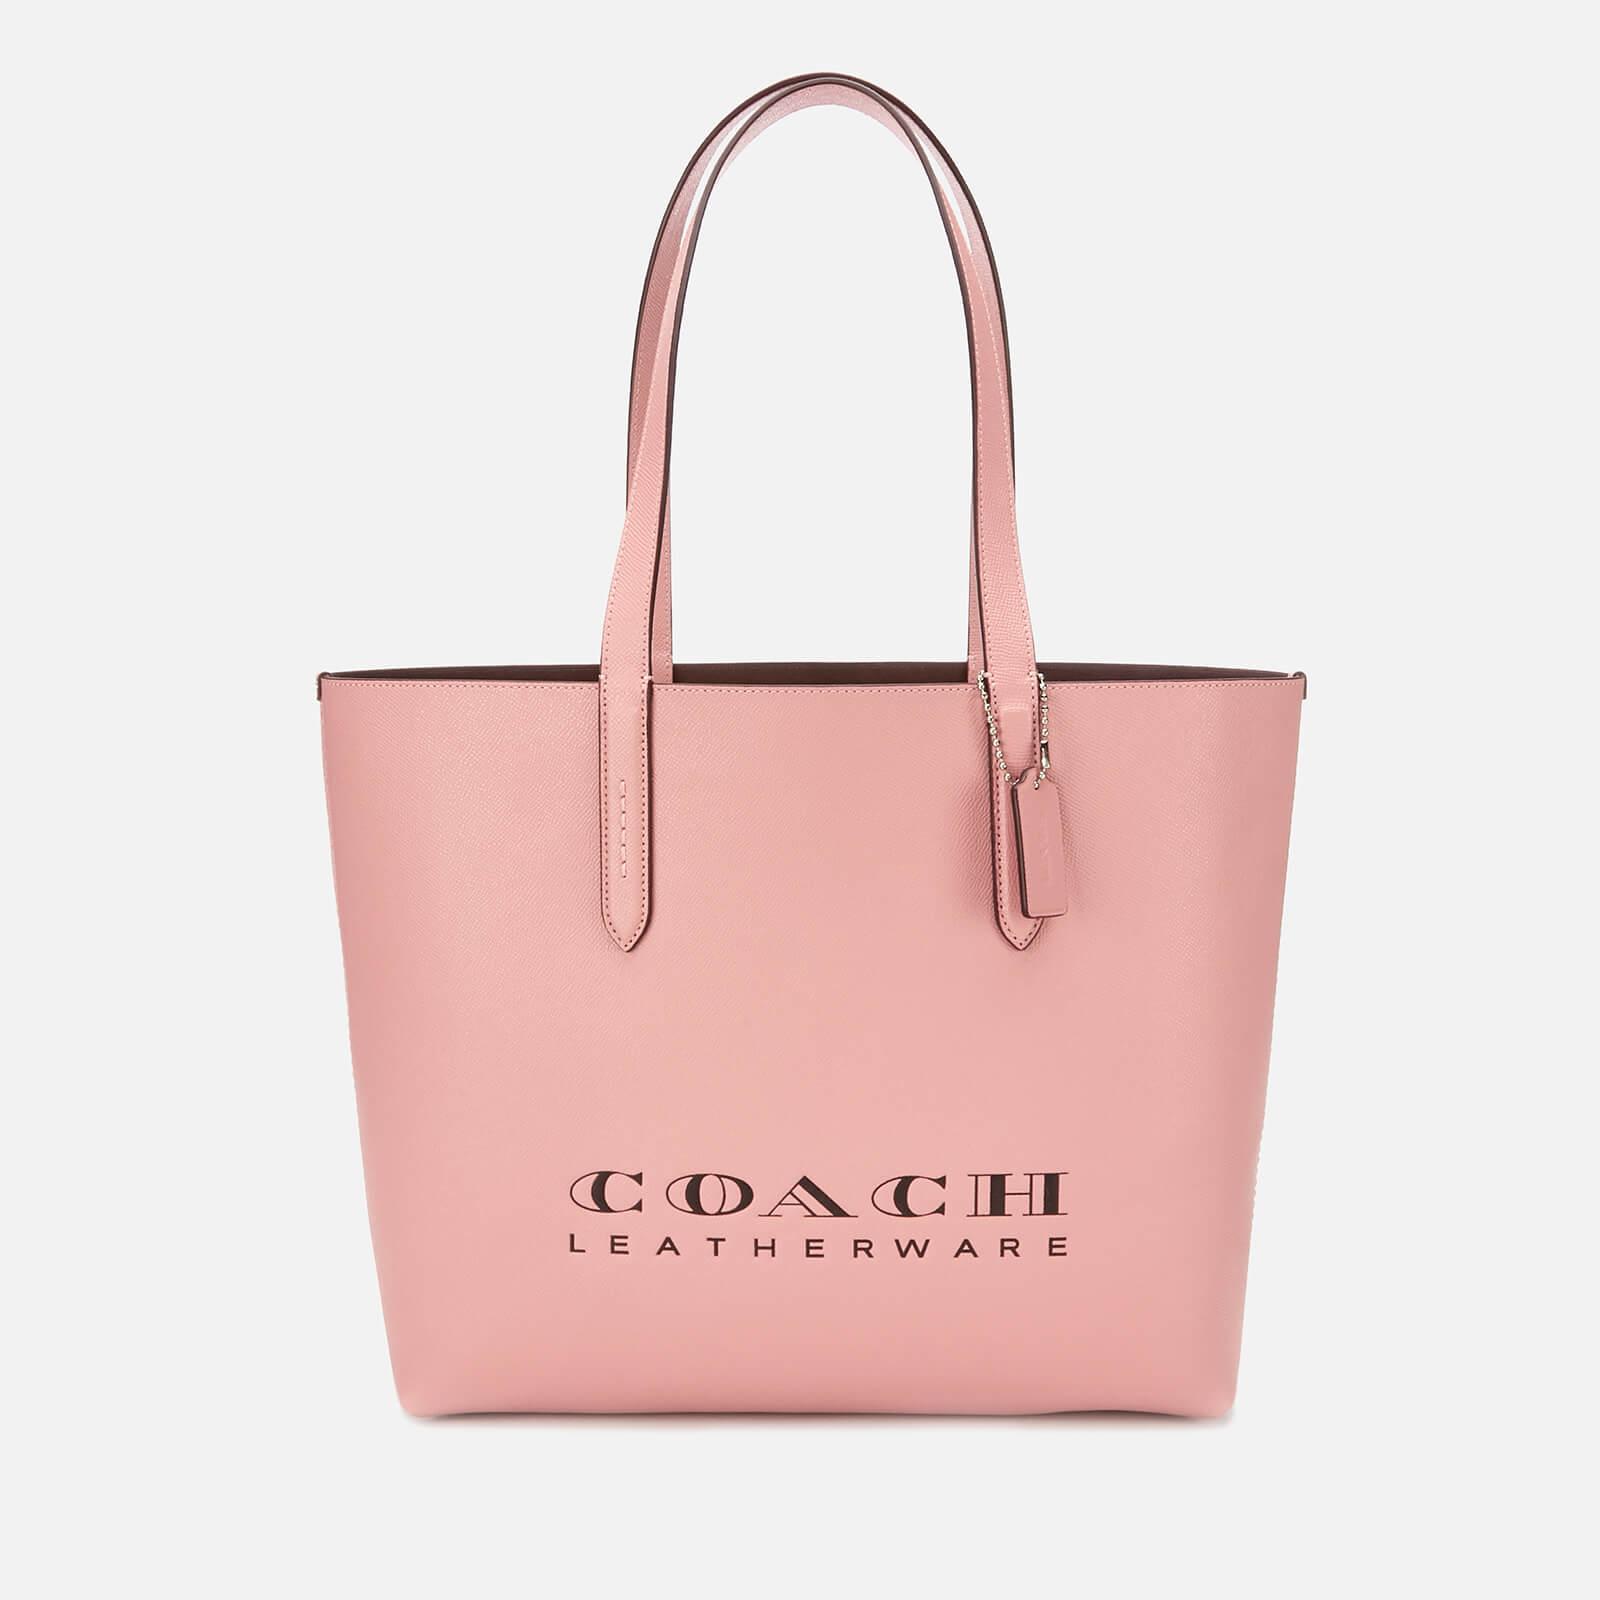 COACH Crossgrain Leather 195 Tote Bag in Pink | Lyst